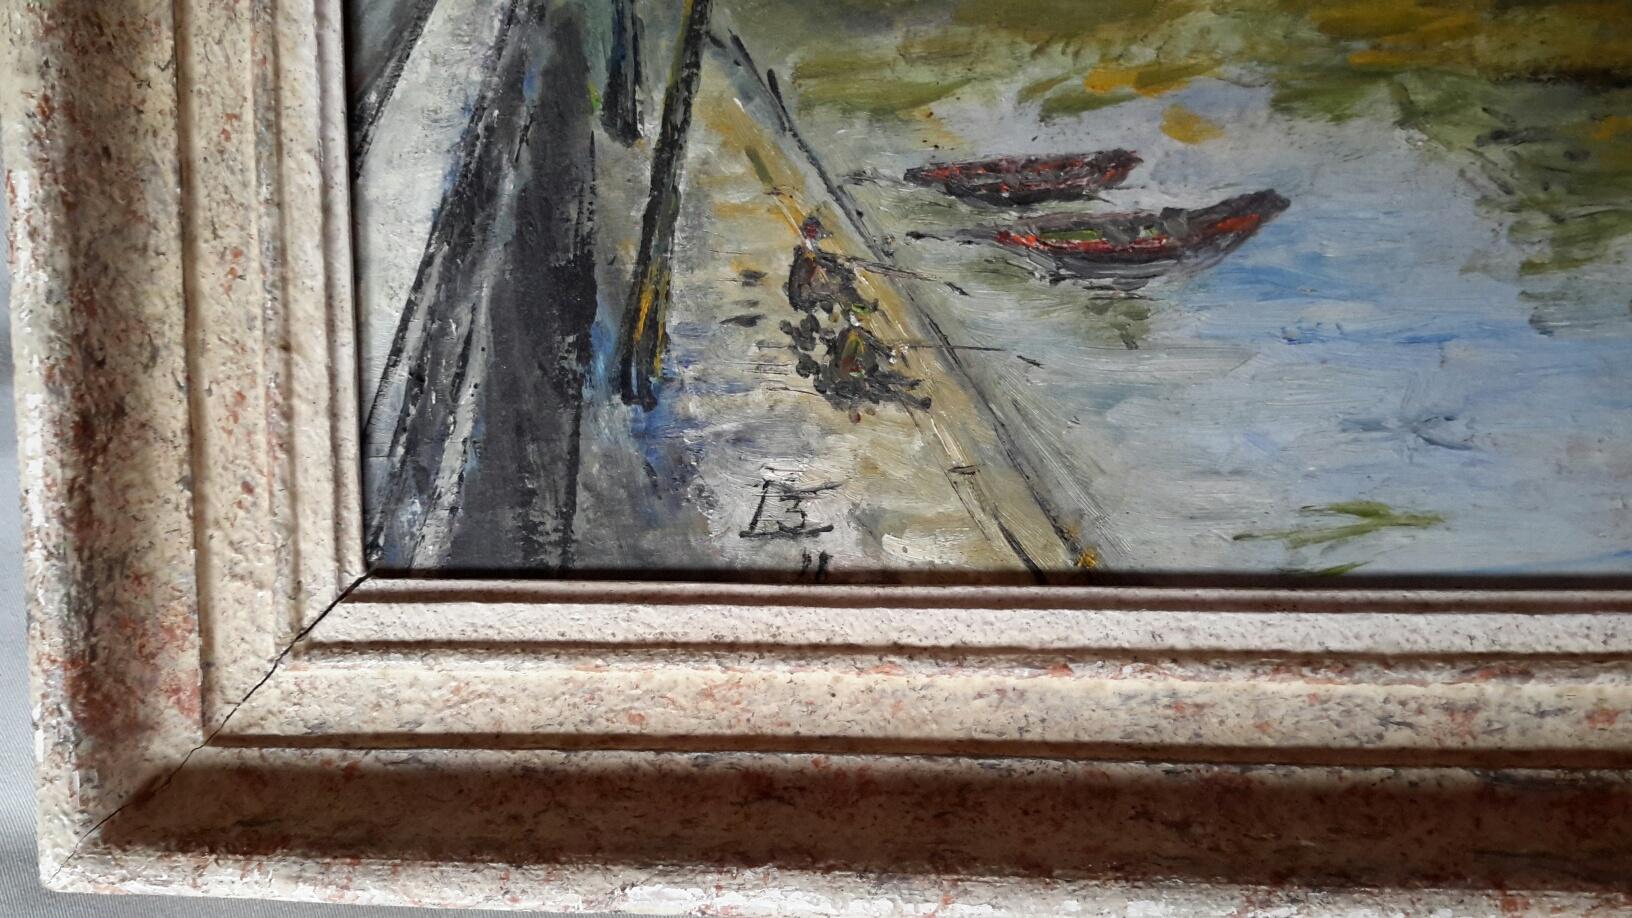 Charming 1940's Claude Bouteur landscape Oil on a wood panel painting in a Post Impressionist style representing the banks of Seine River and the Pont Marie Bridge, a lovely composition Parisian in the 1940